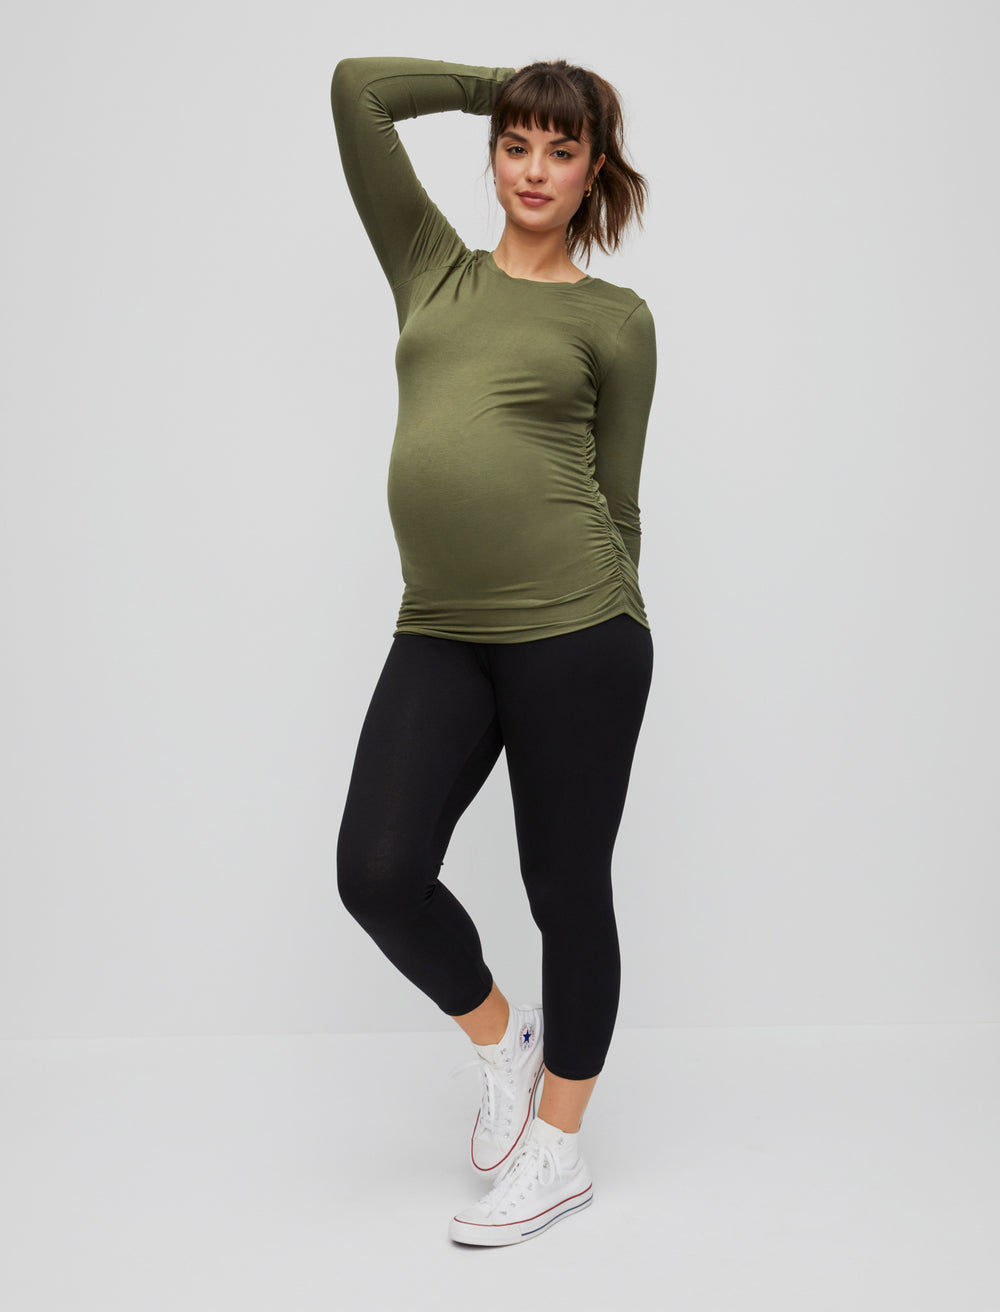 Best Maternity Support Leggings: High Waisted, Over The Belly & More –  Belly Bandit